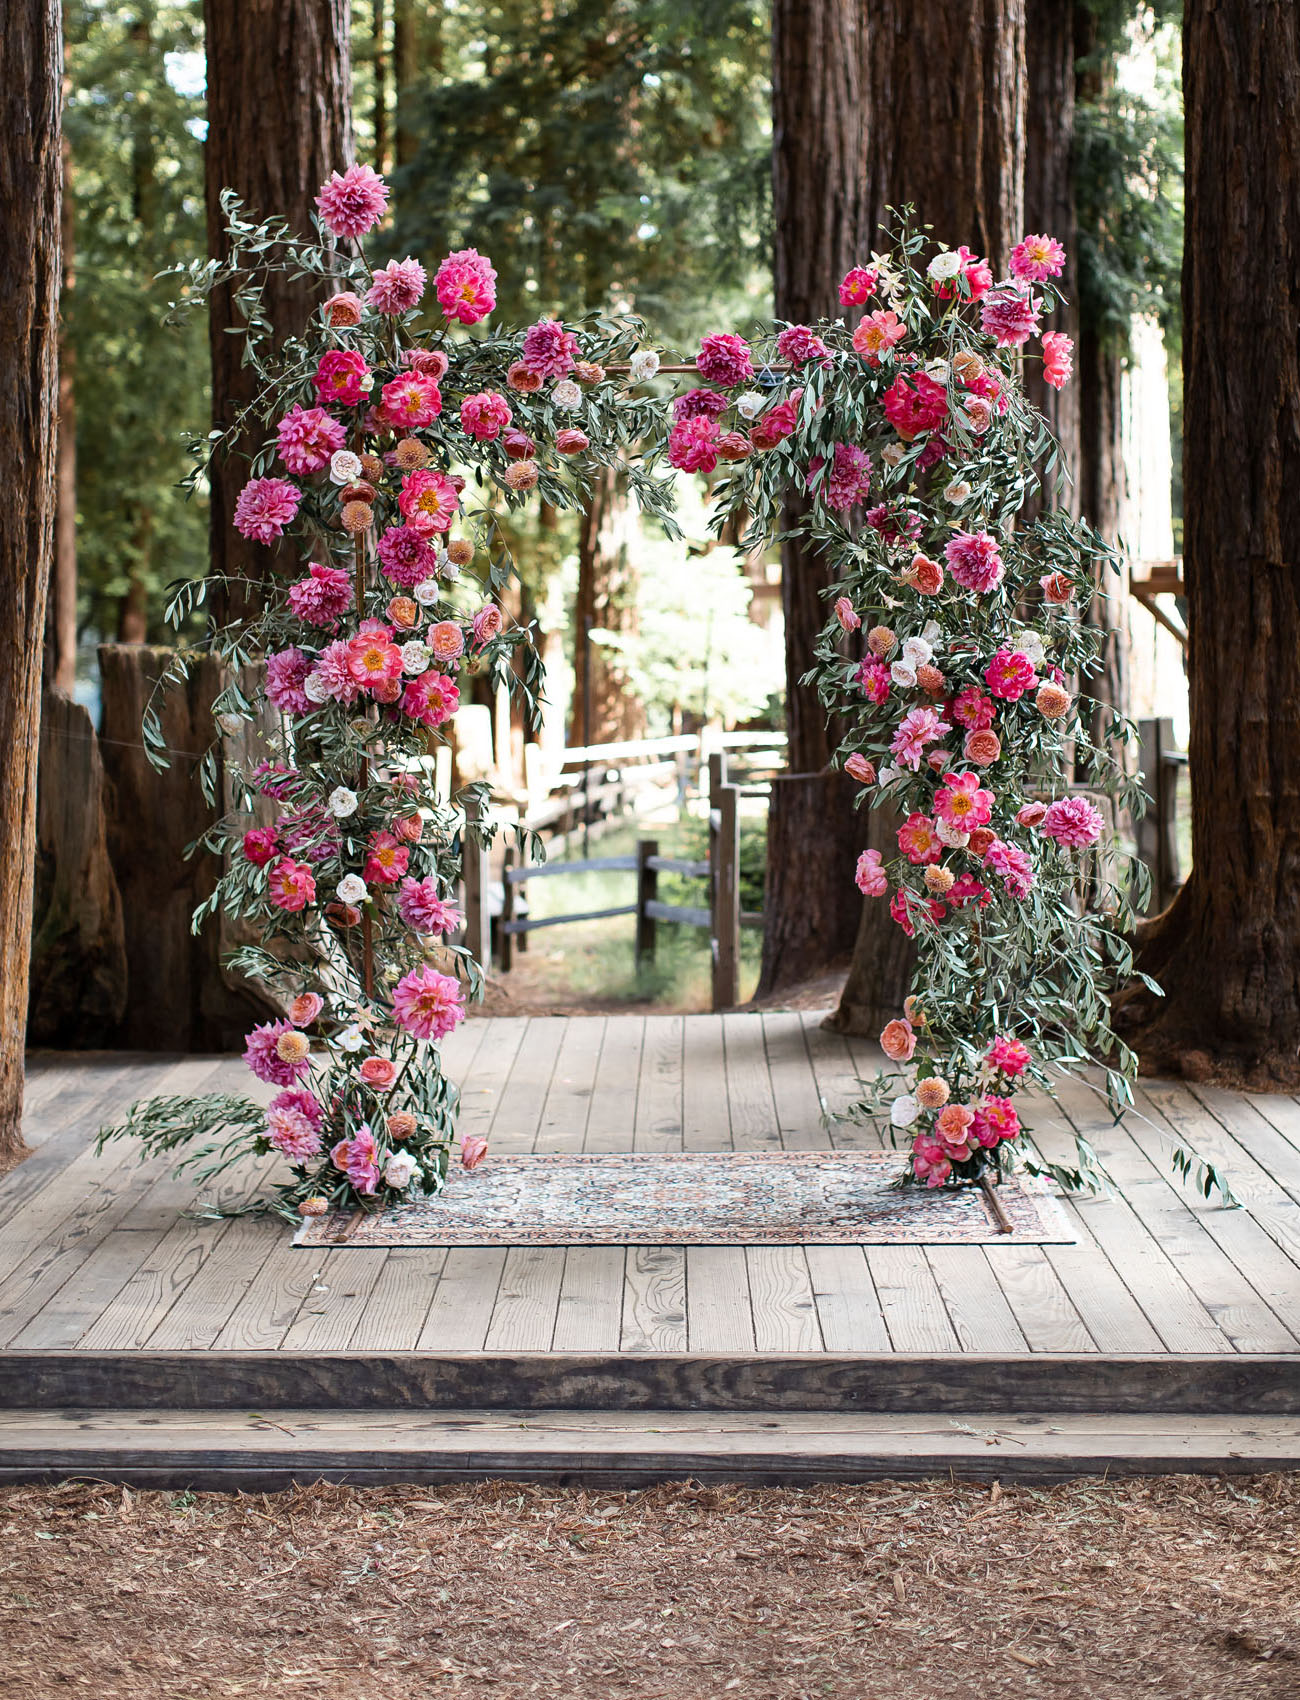 The wedding arch was done with lush greenery and bold blooms in fuchsia and pink plus deep reds